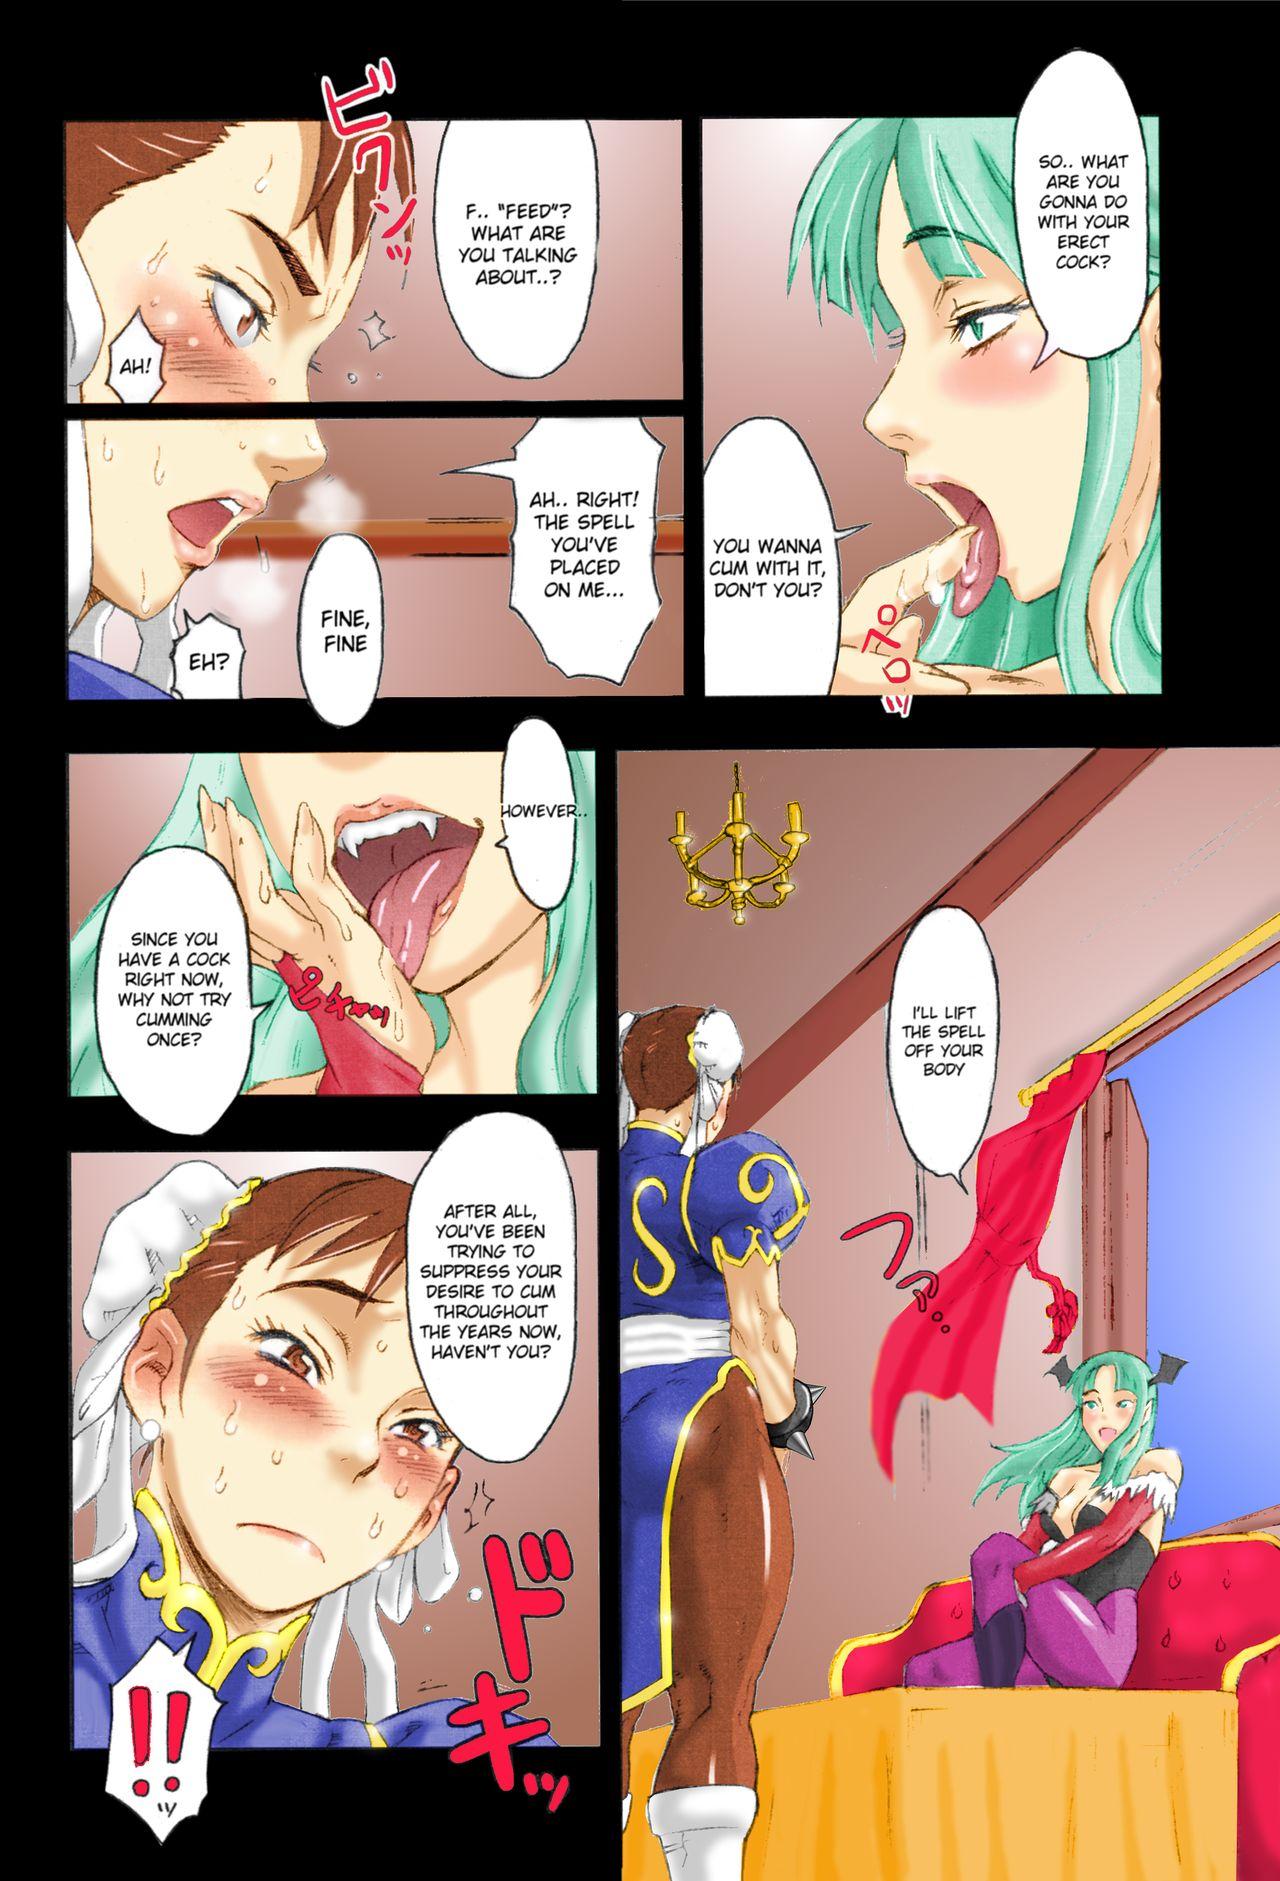 Wet Pussy NIPPON Onna HEROINE 2 - Street fighter Darkstalkers Wives - Page 9